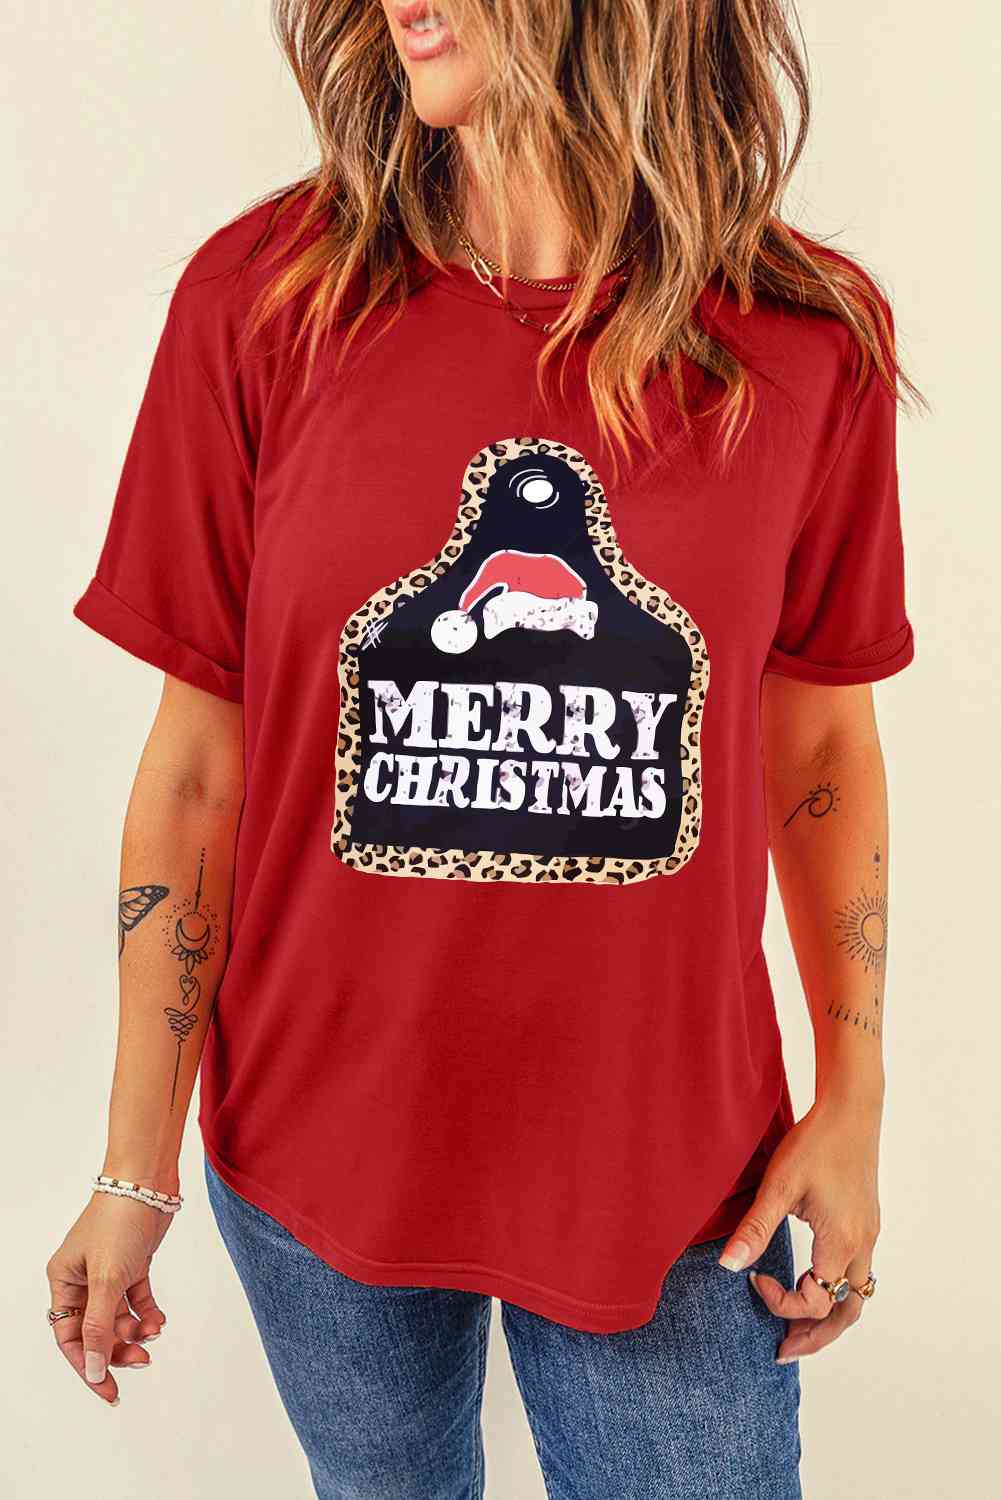 MERRY CHRISTMAS Graphic T-Shirt - Kawaii Stop - Christmas, Christmas T-Shirt, Comfortable Fit, Festive Fashion, Festive Look, Graphic Tee, Holiday Apparel, Holiday Cheer, Holiday Outfit, Seasonal Style, Ship From Overseas, SYNZ, Winter Wardrobe